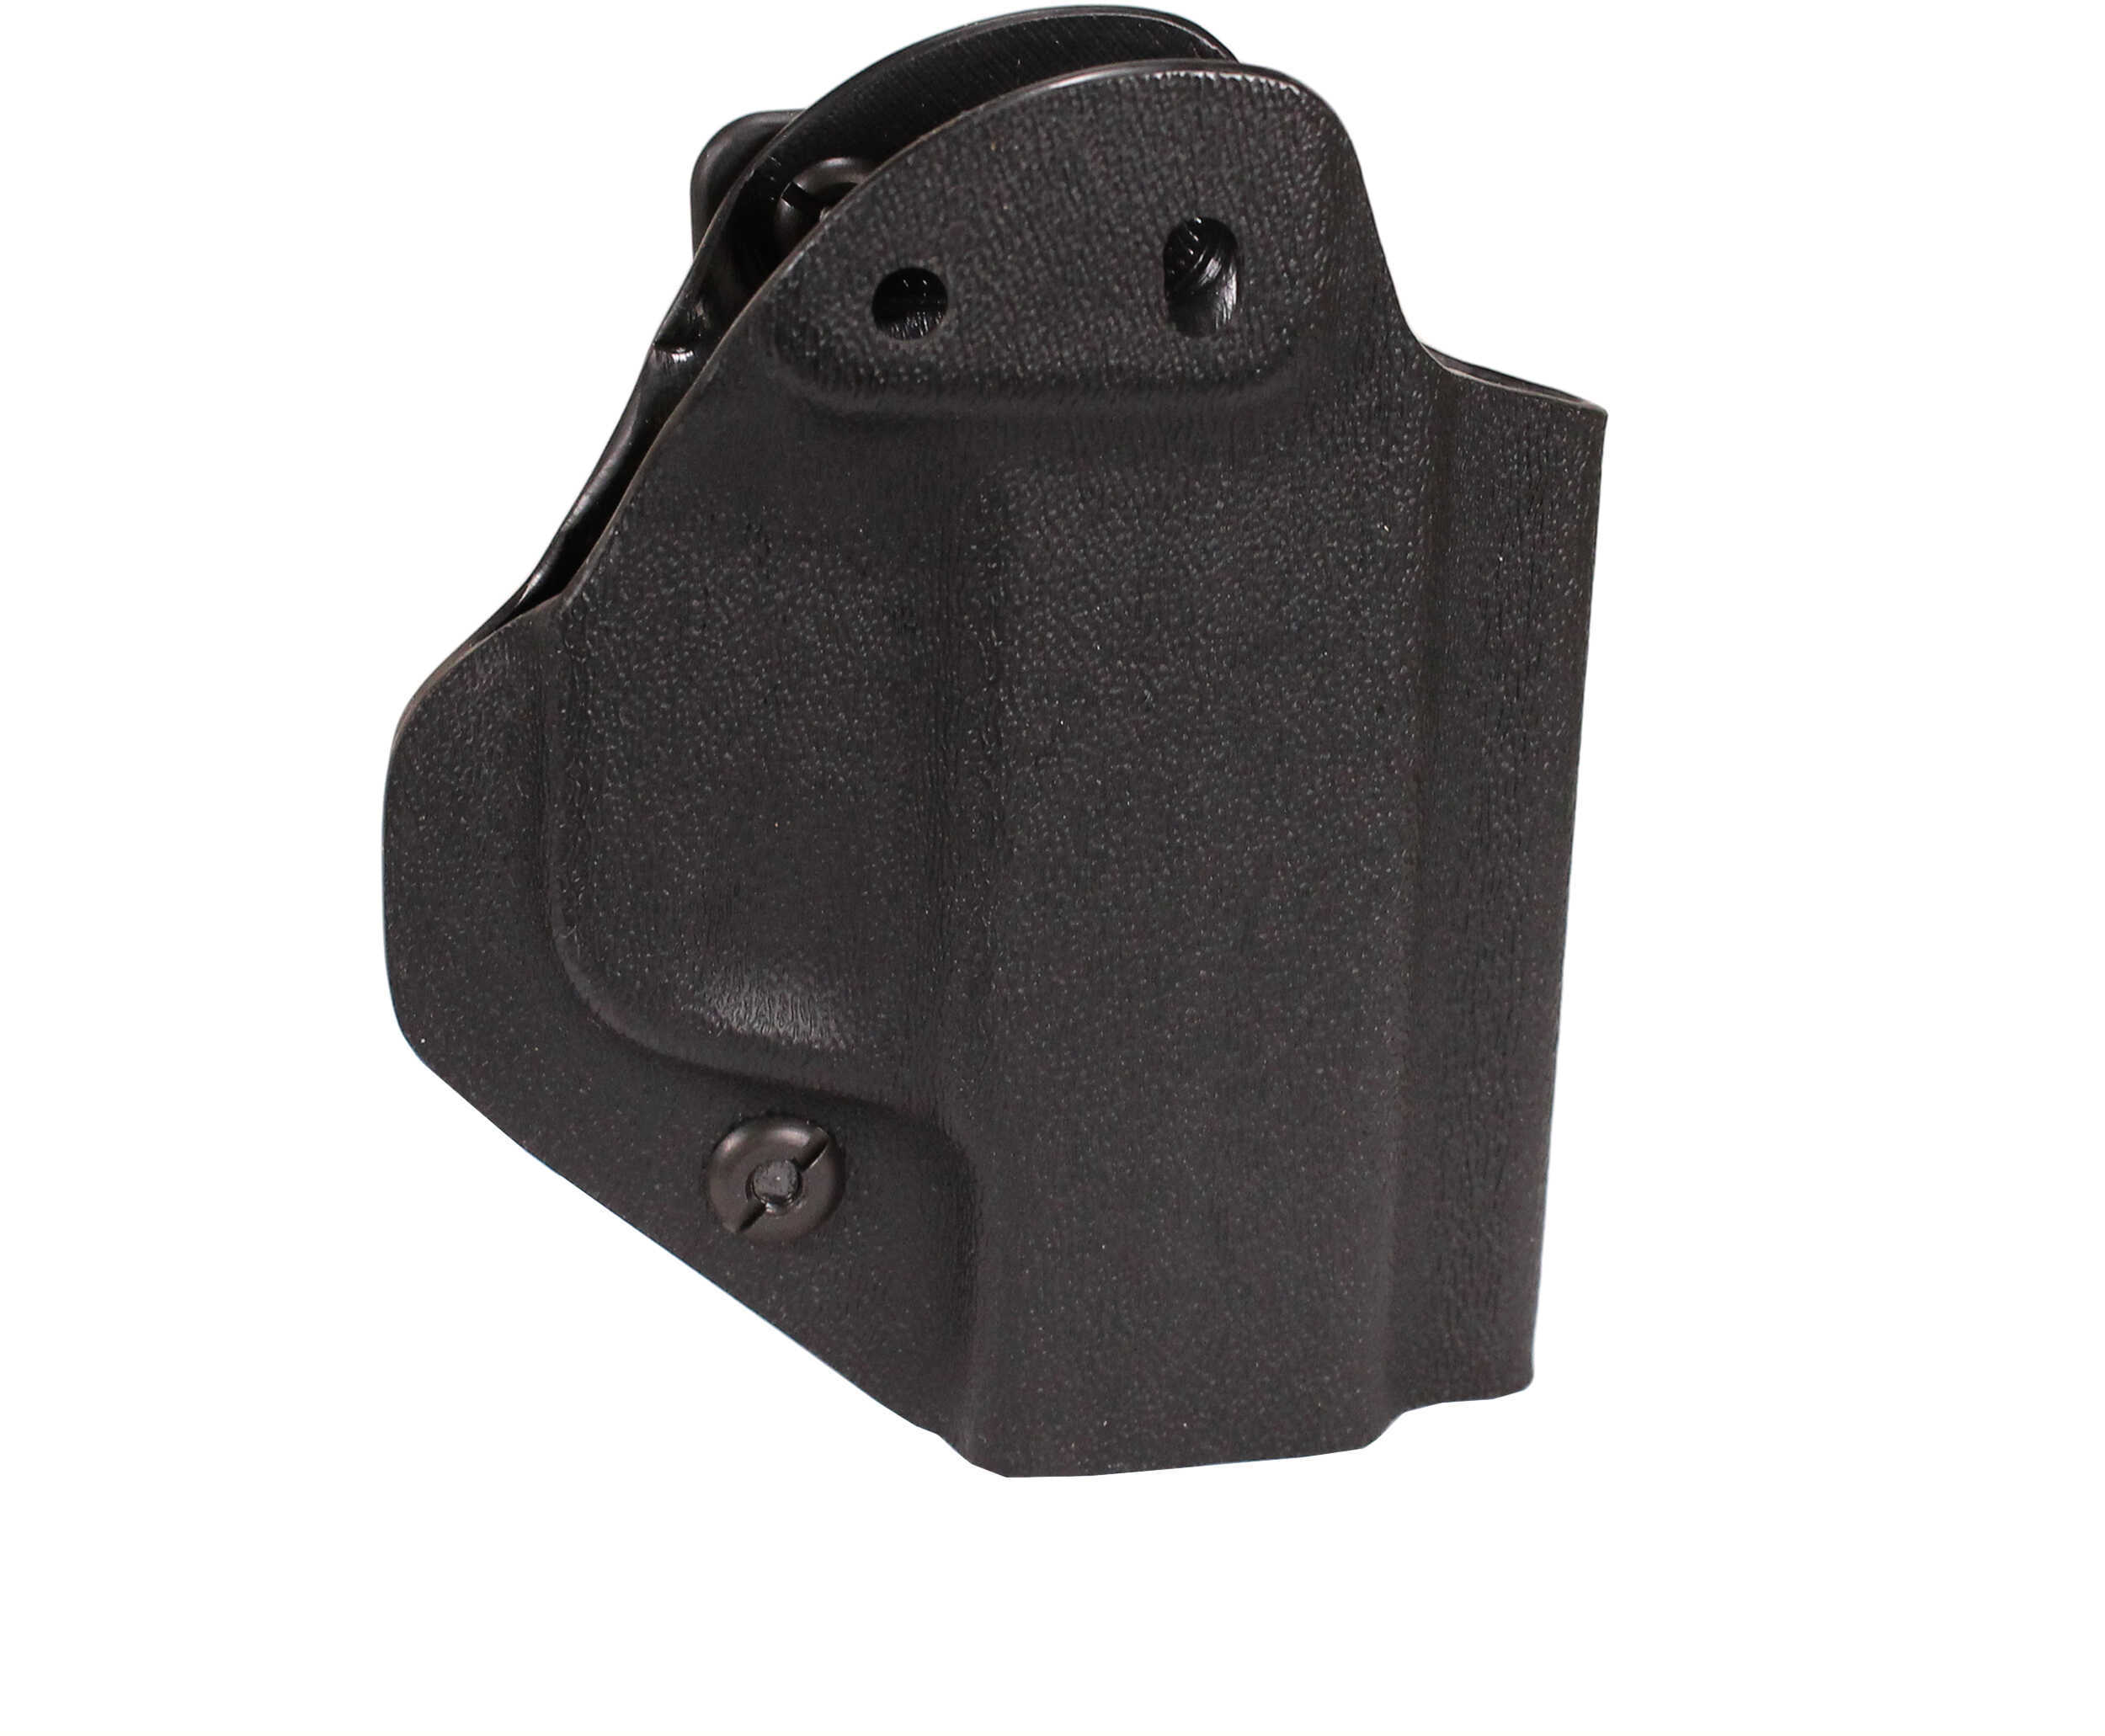 Inside the Waist Band Holster Ruger LCP II, Ambidextrous, Black